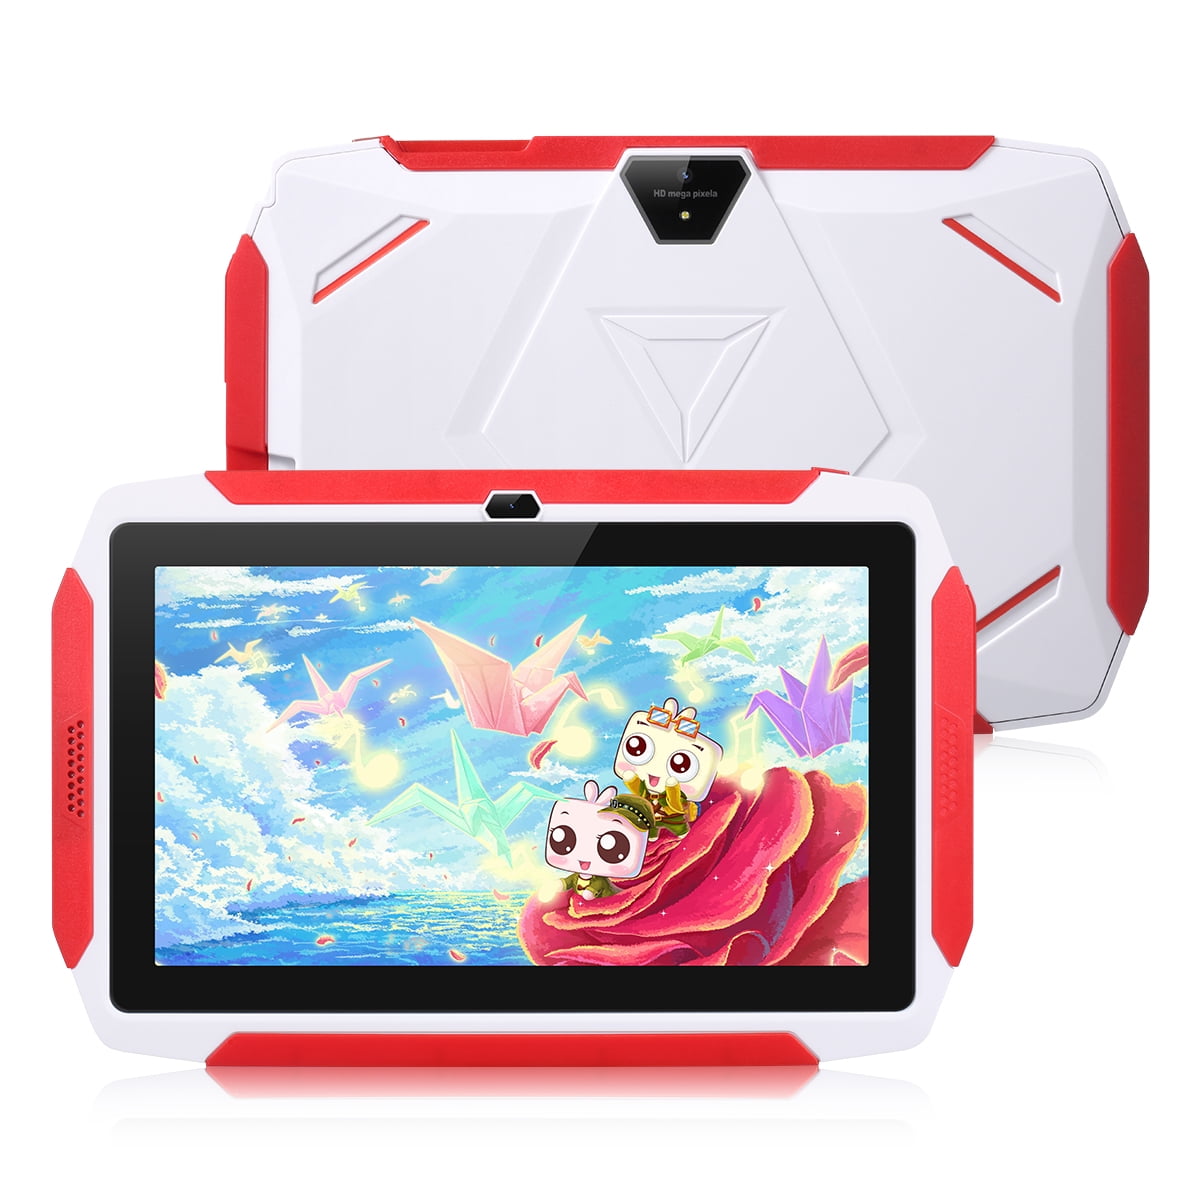 Kids Tablet Excelvan Q98 Tablets Android 9 0 7 Display 1g Ram 16 Gb Rom Light Weight Portable Kid Proof Shock Proof Silicone Case Kickstand Available With Iwawa For Kids Education Entertainment Walmart Com